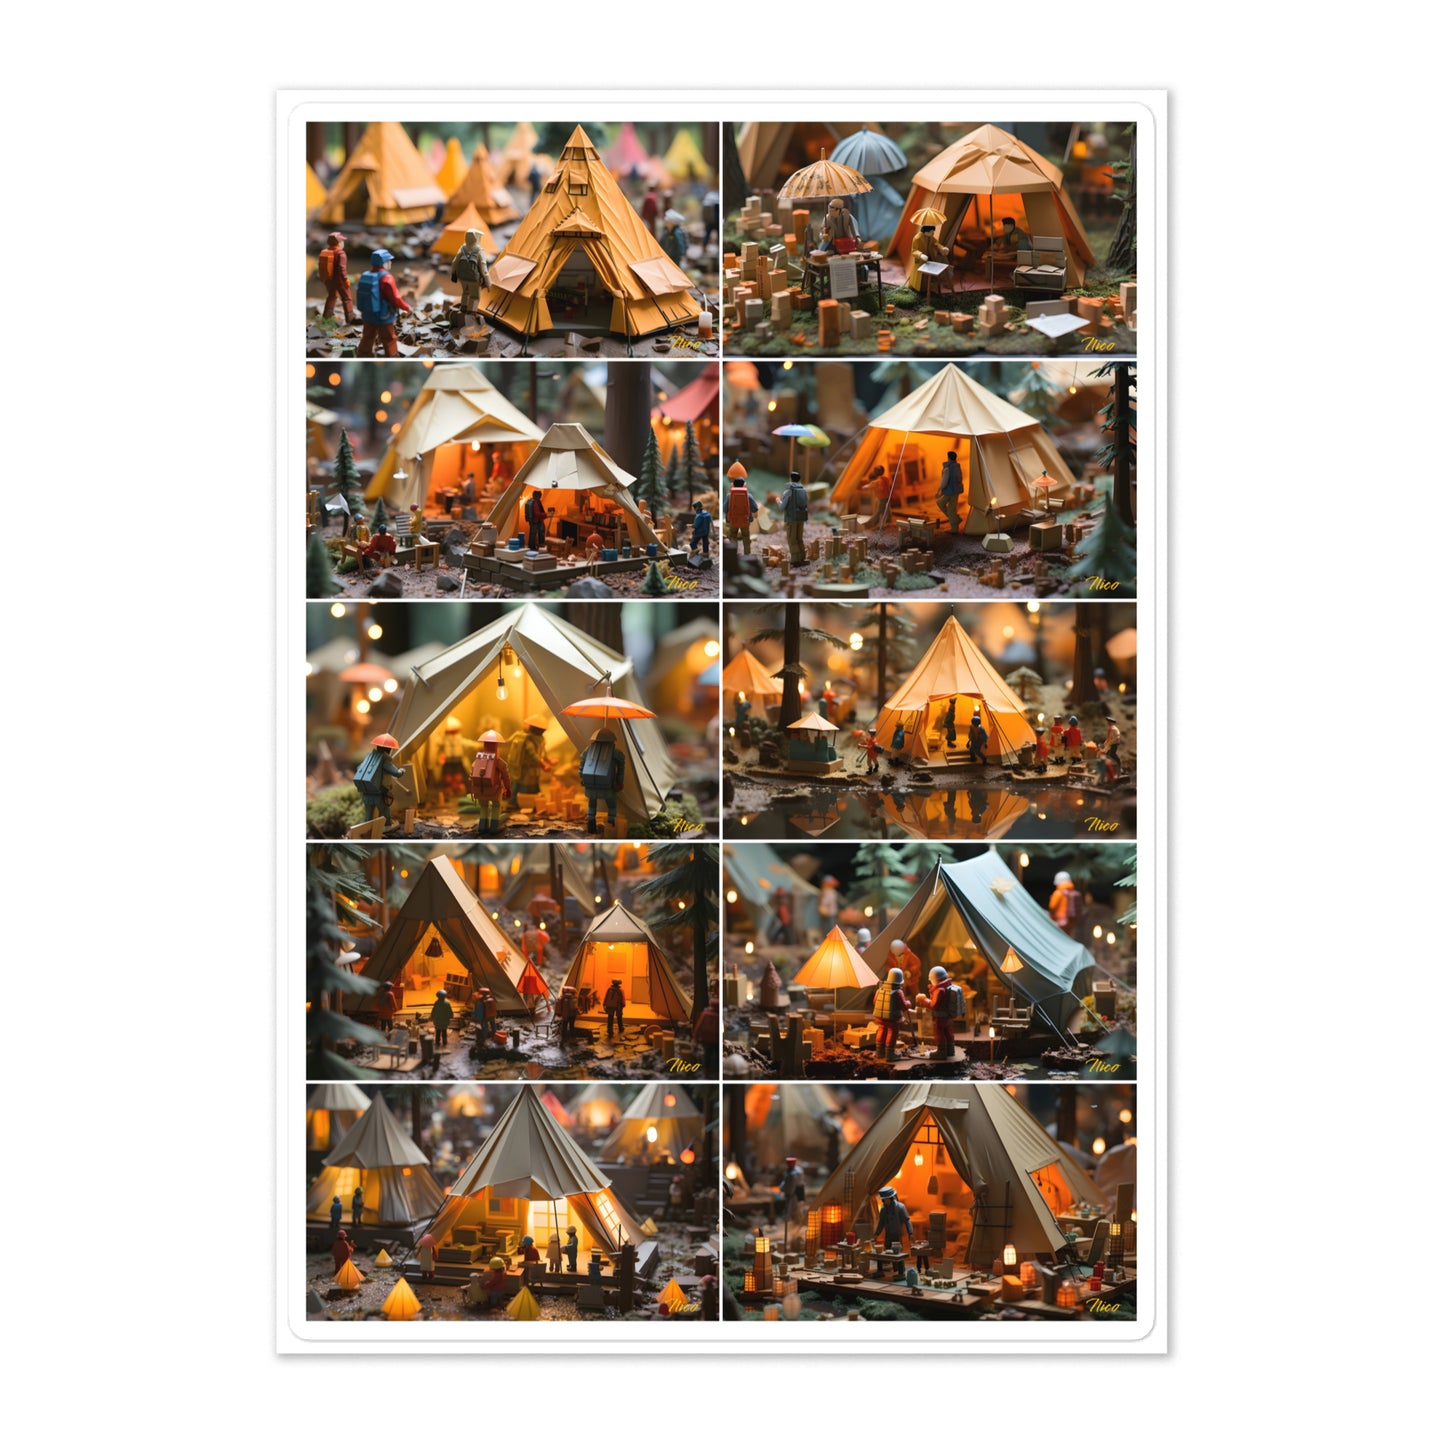 Camping In The Rain - All 10 Prints In Series - Sticker sheet